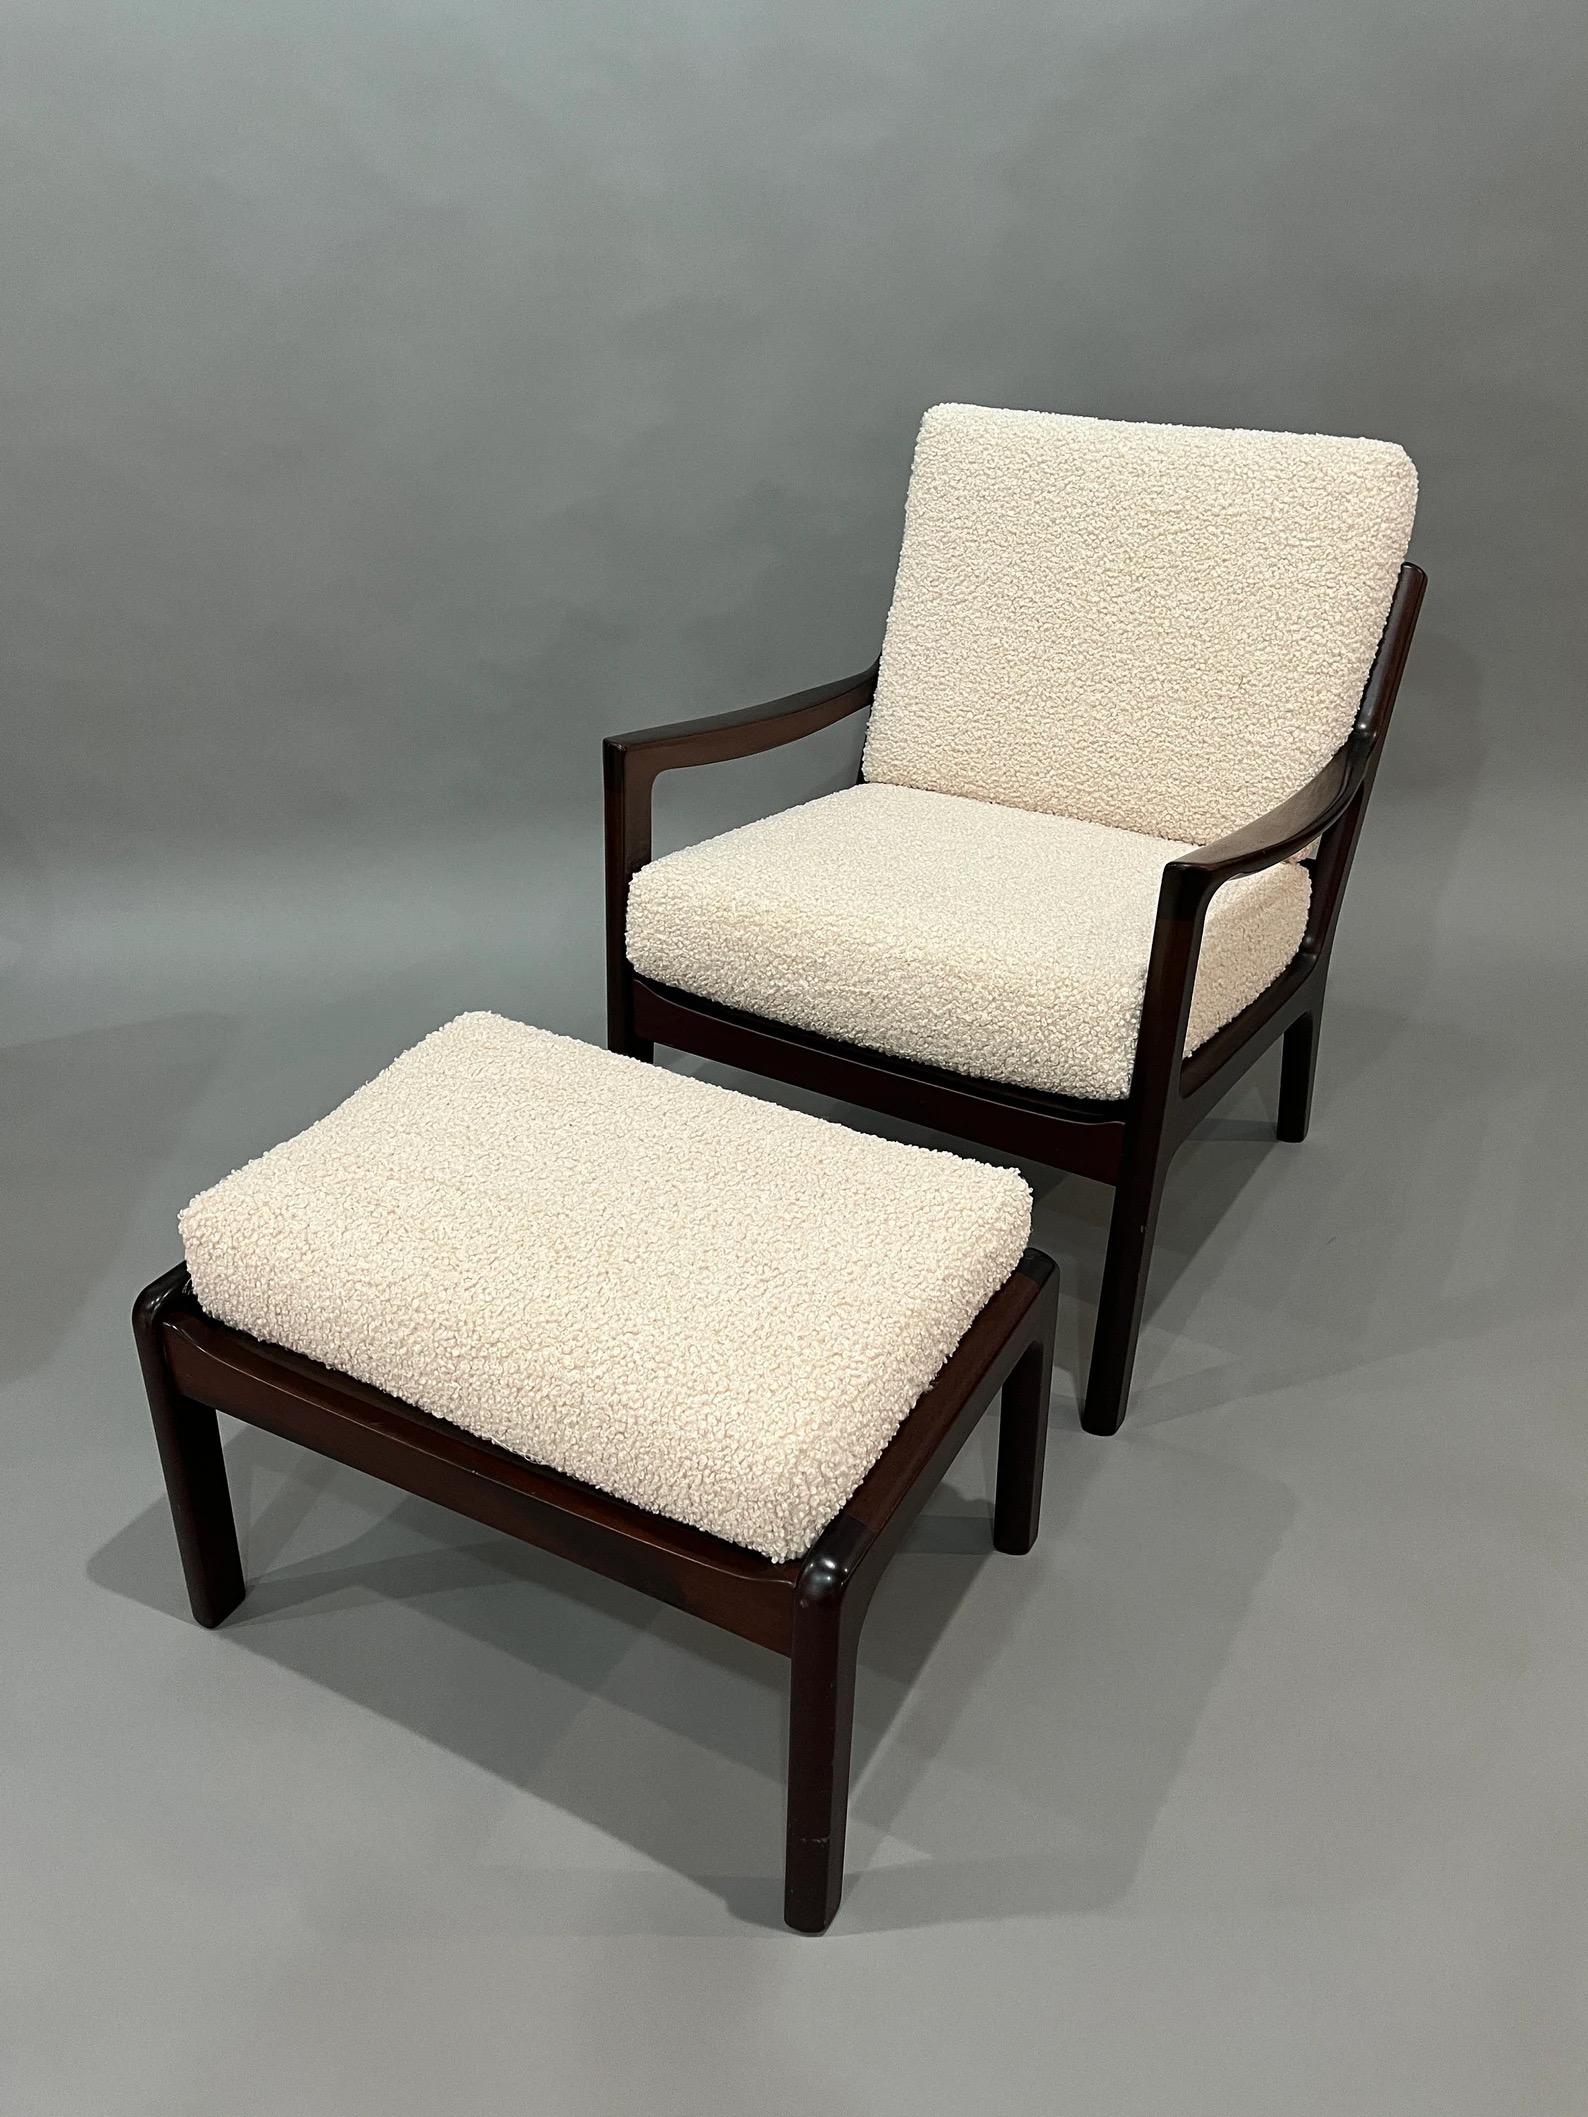 Mahogany Mid-Century Lounge Chair with Ottoman 1960's